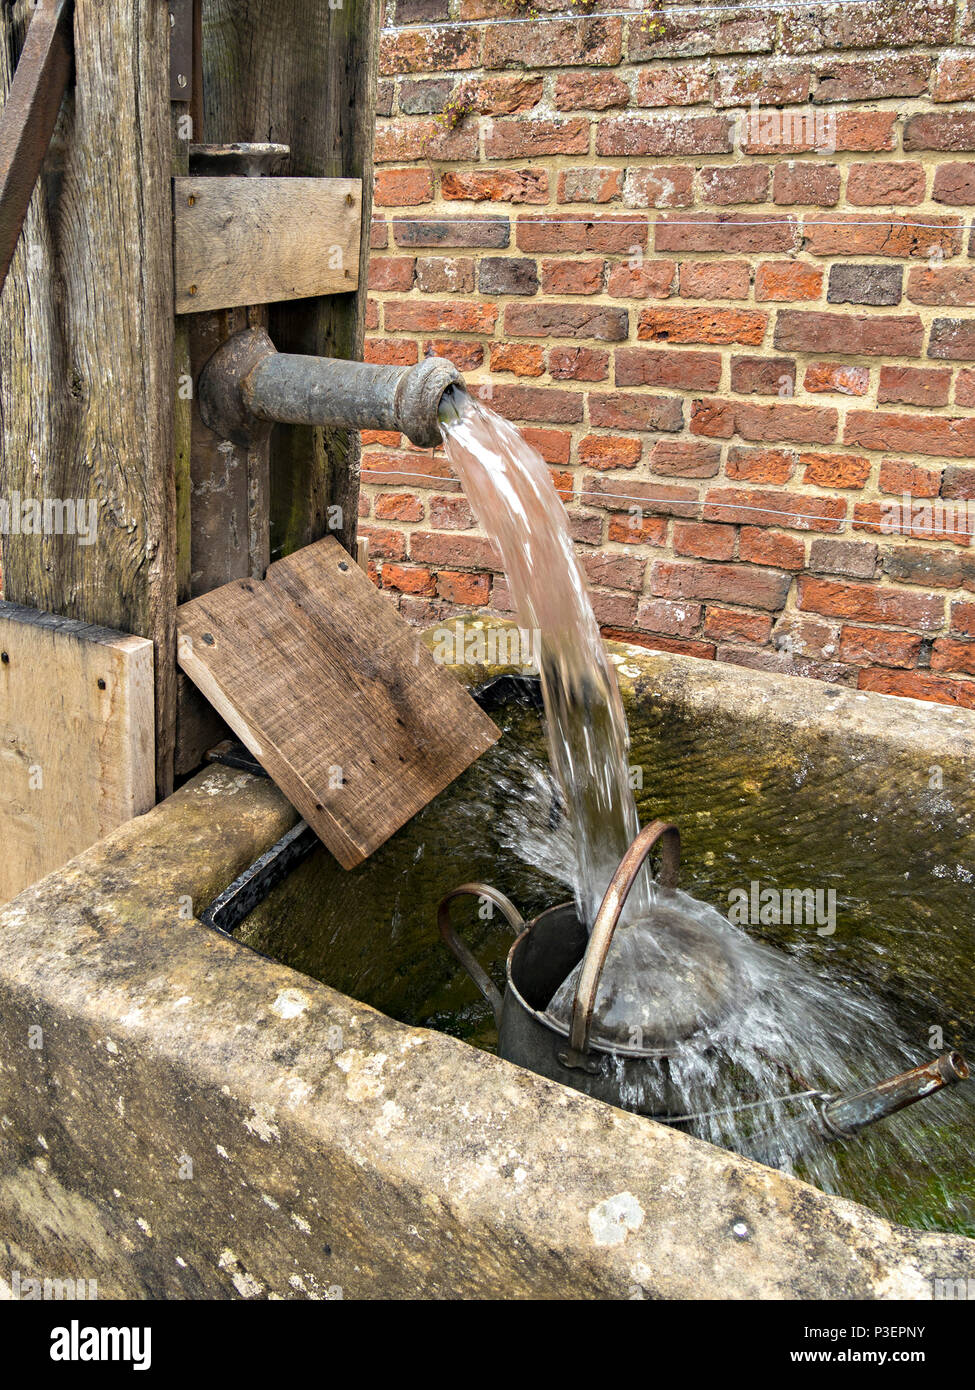 Old hand water pump with water pouring from lead pipe over garden watering can in stone trough. Stock Photo